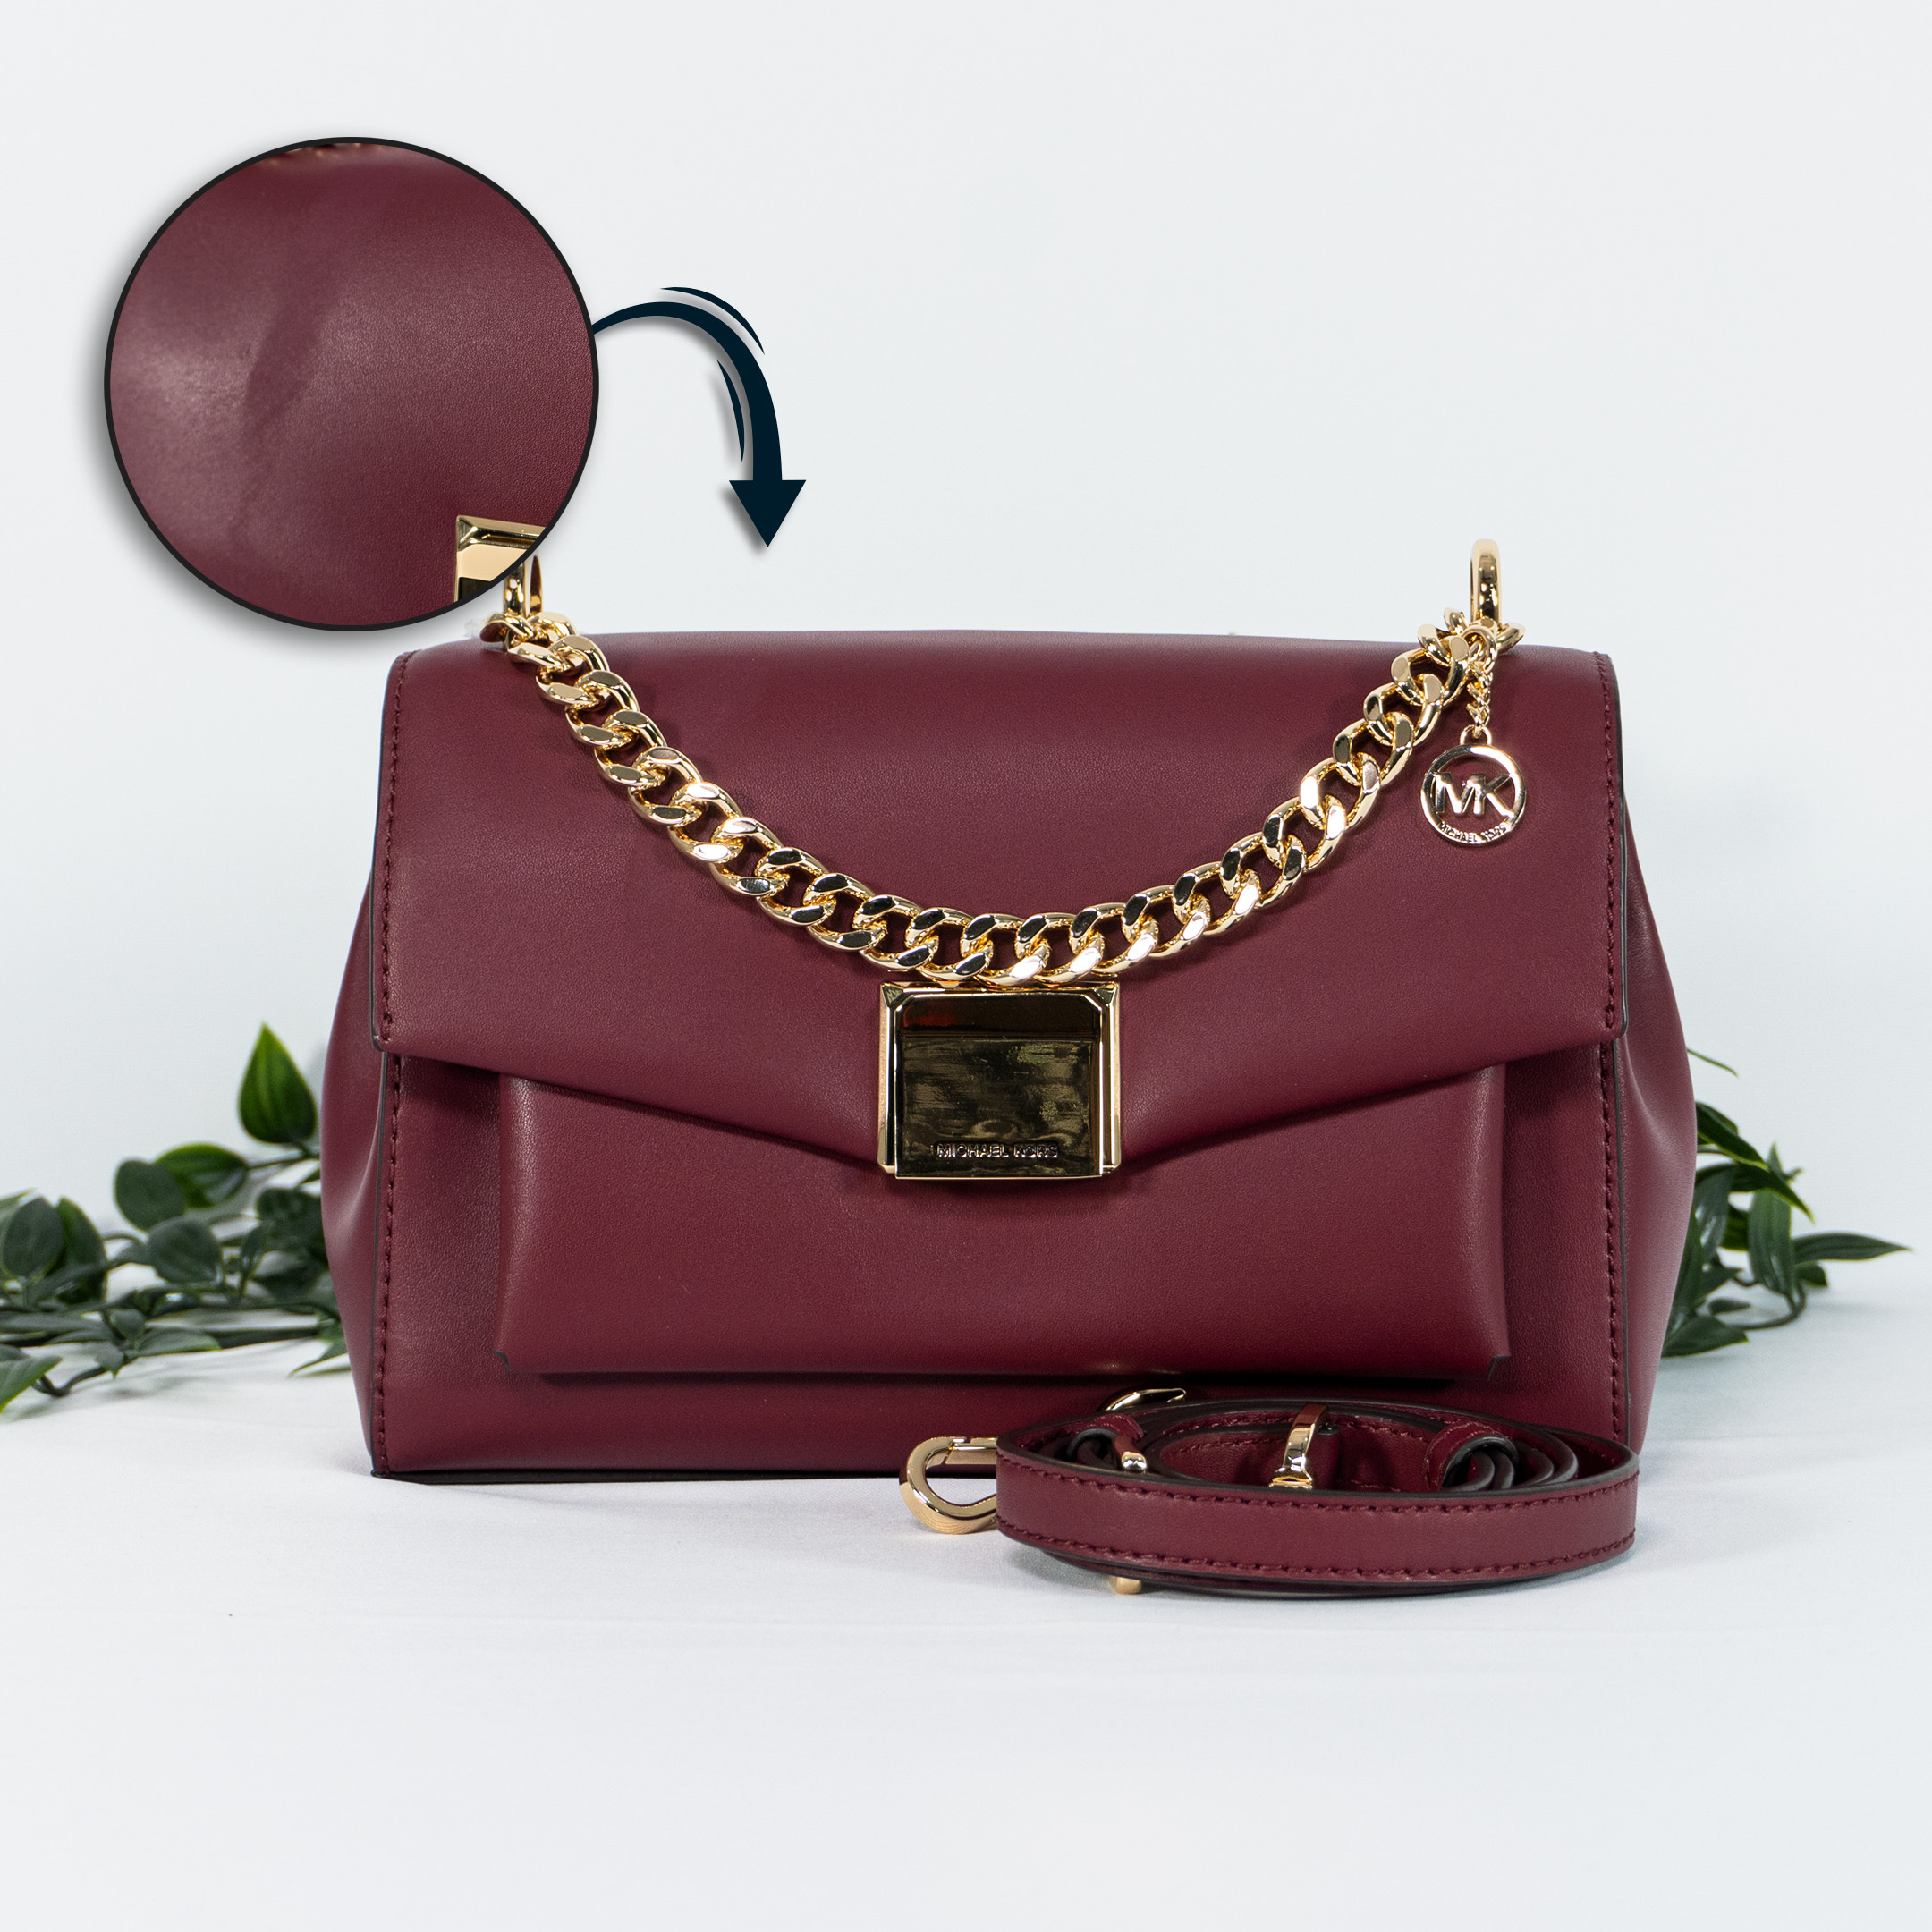 MICHAEL KORS Lita Md in Mulberry (DEFECT - PLEASE REFER PICTURE) –  Masfreenky Shopperholic